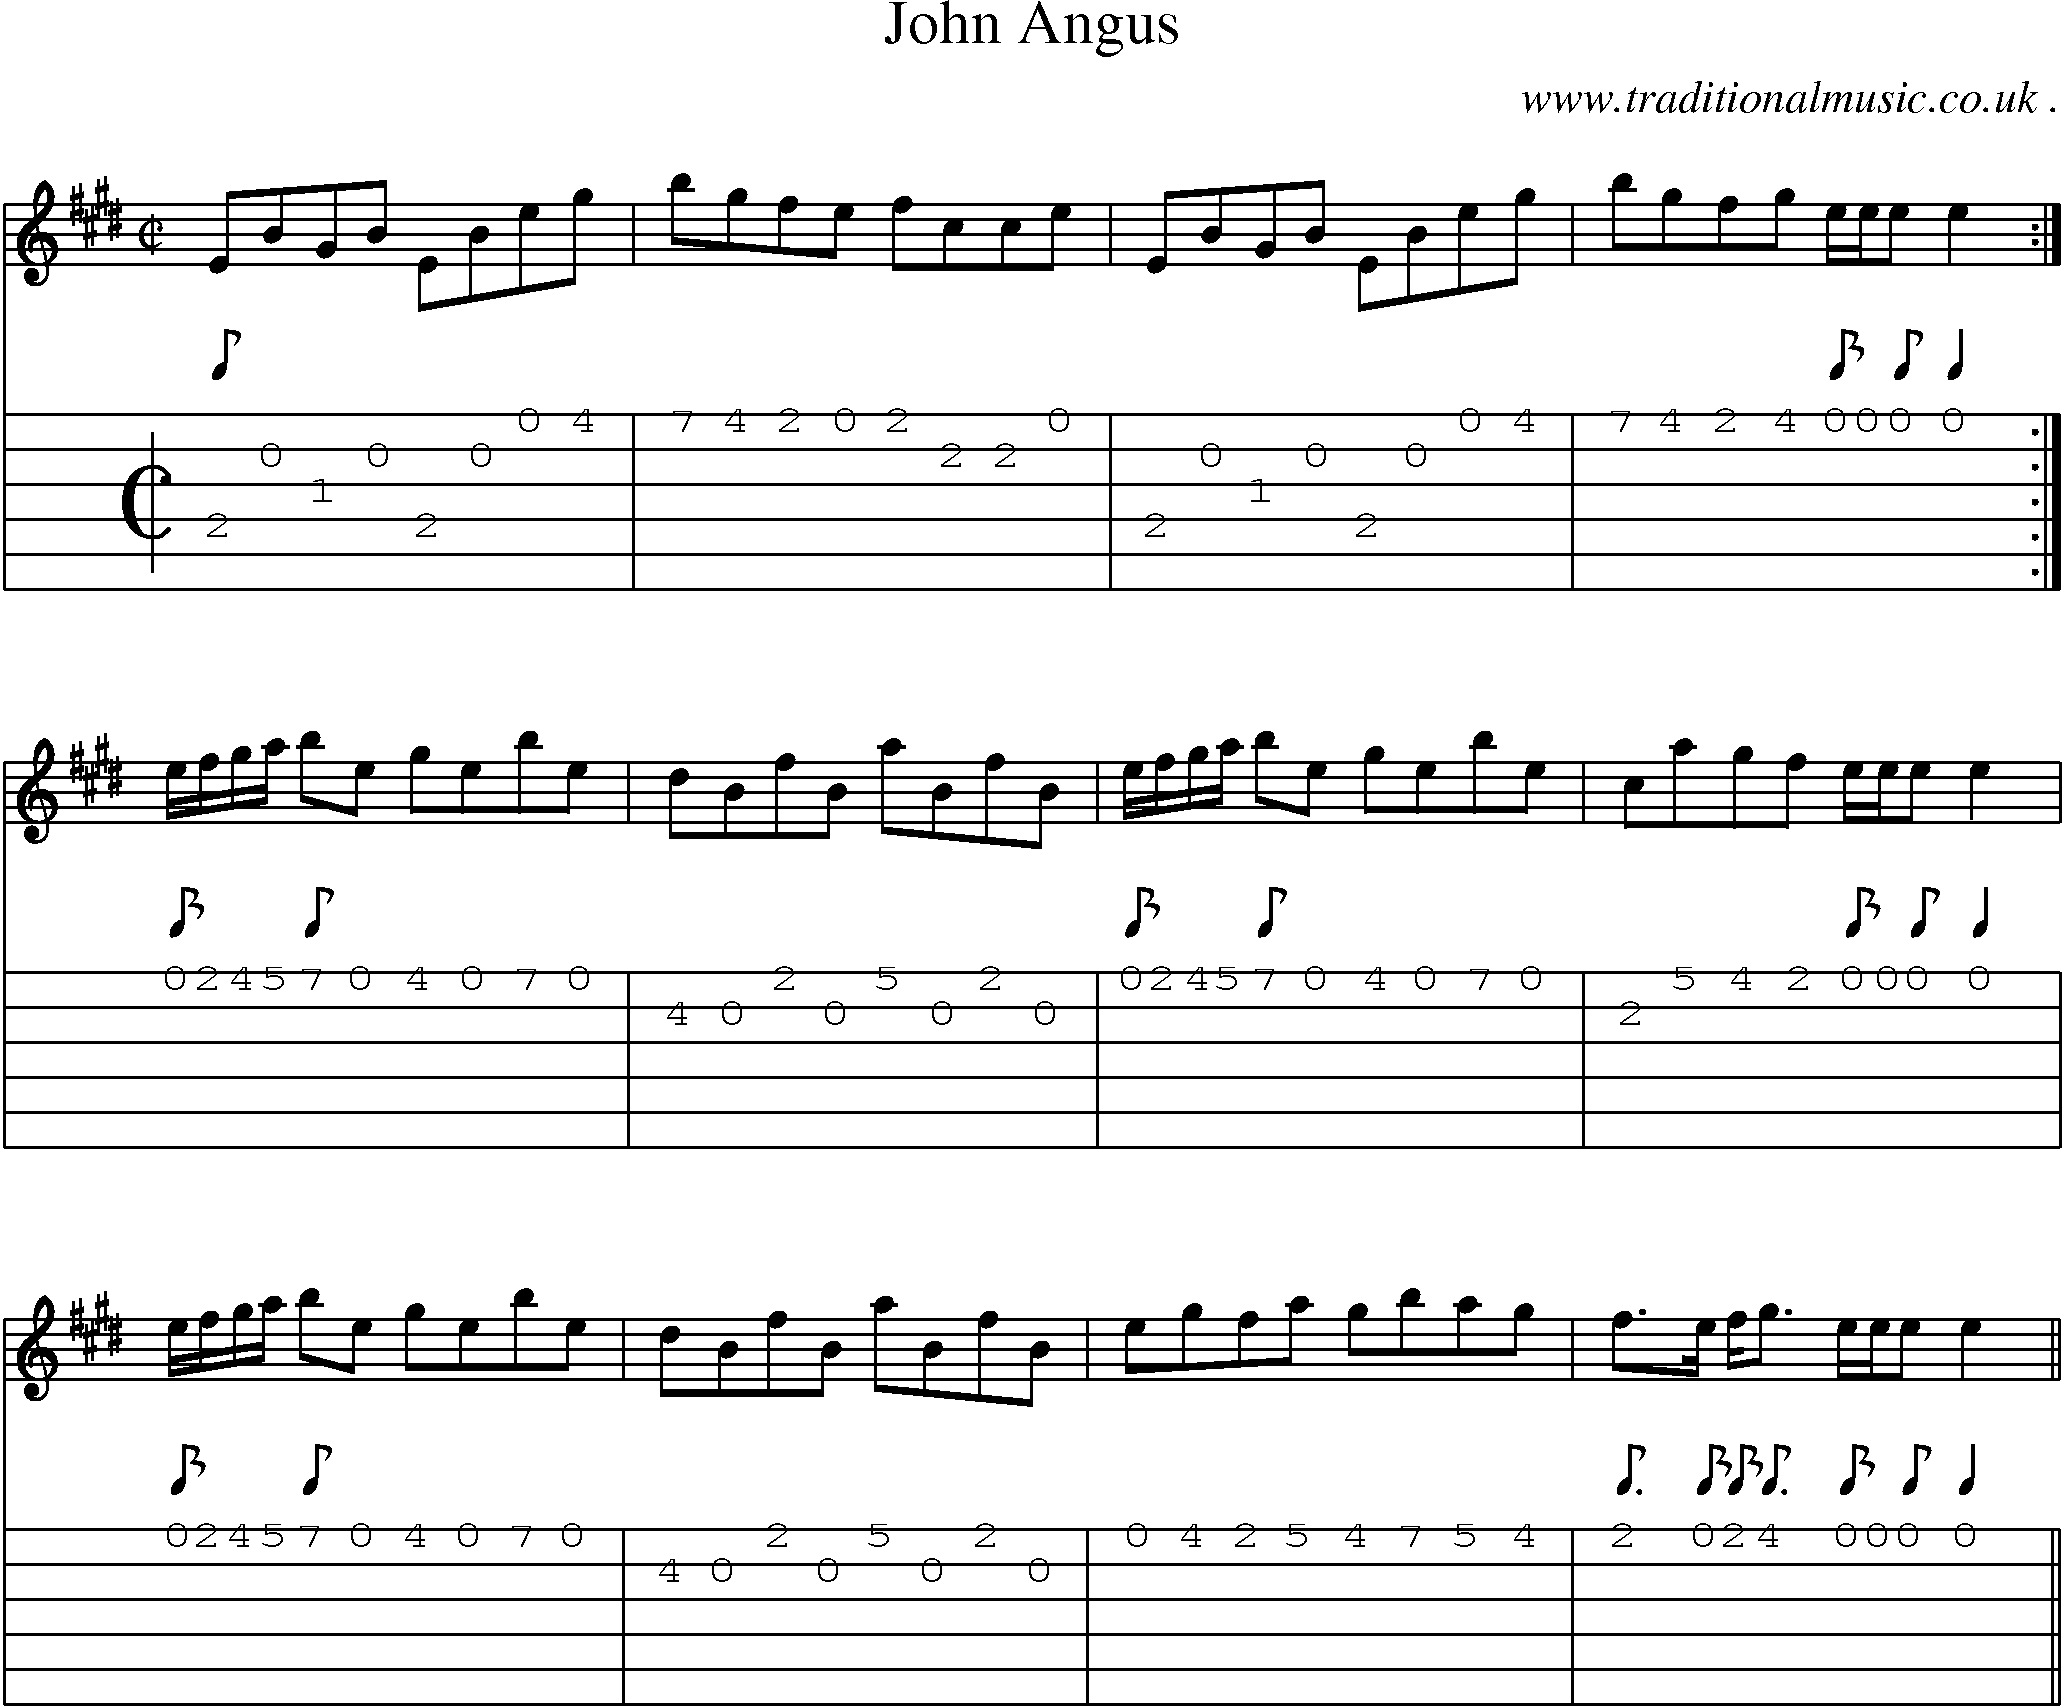 Sheet-music  score, Chords and Guitar Tabs for John Angus